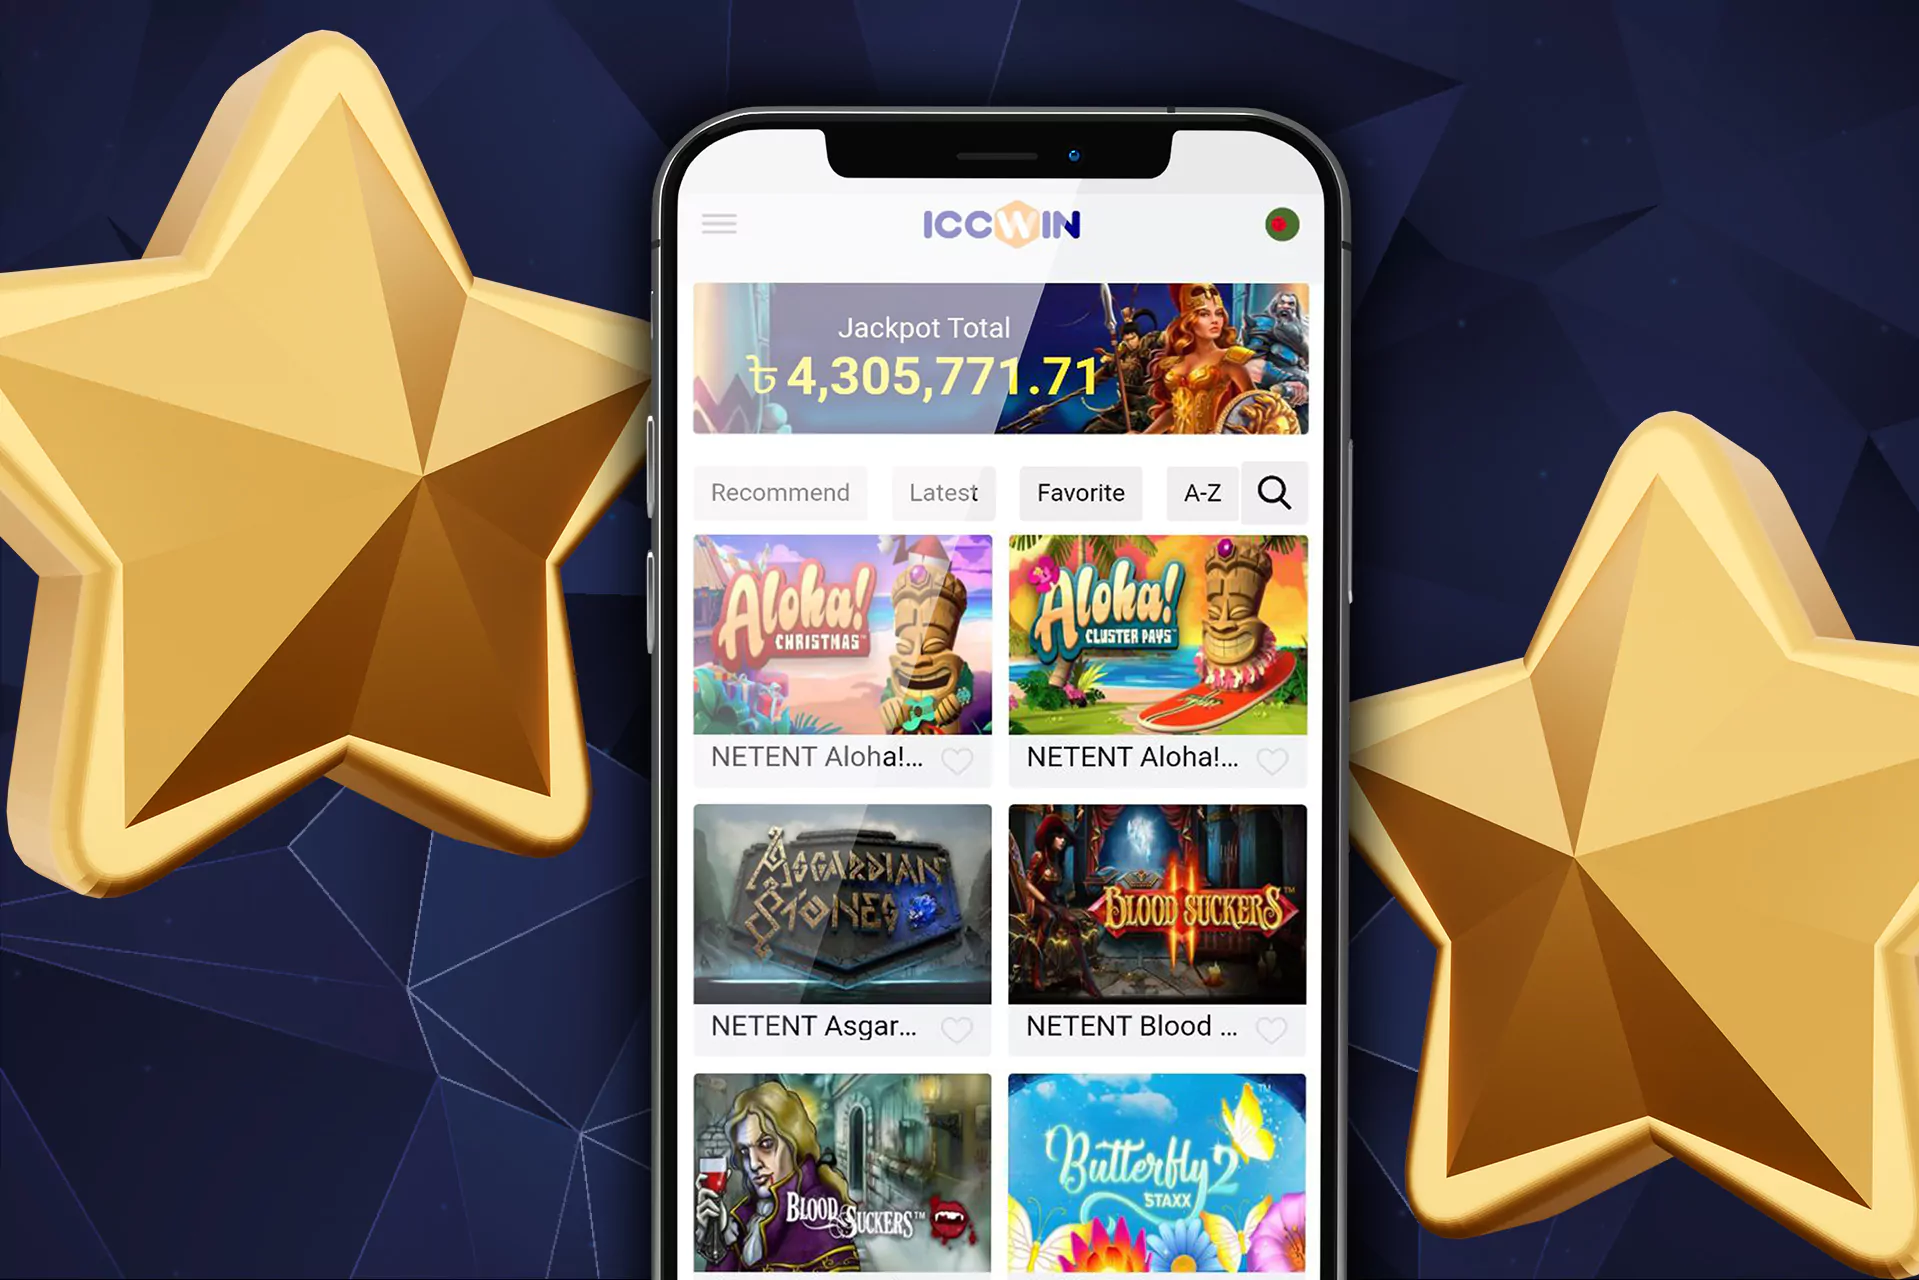 You will find a lot of betting options and casino games in the ICCWIN app.